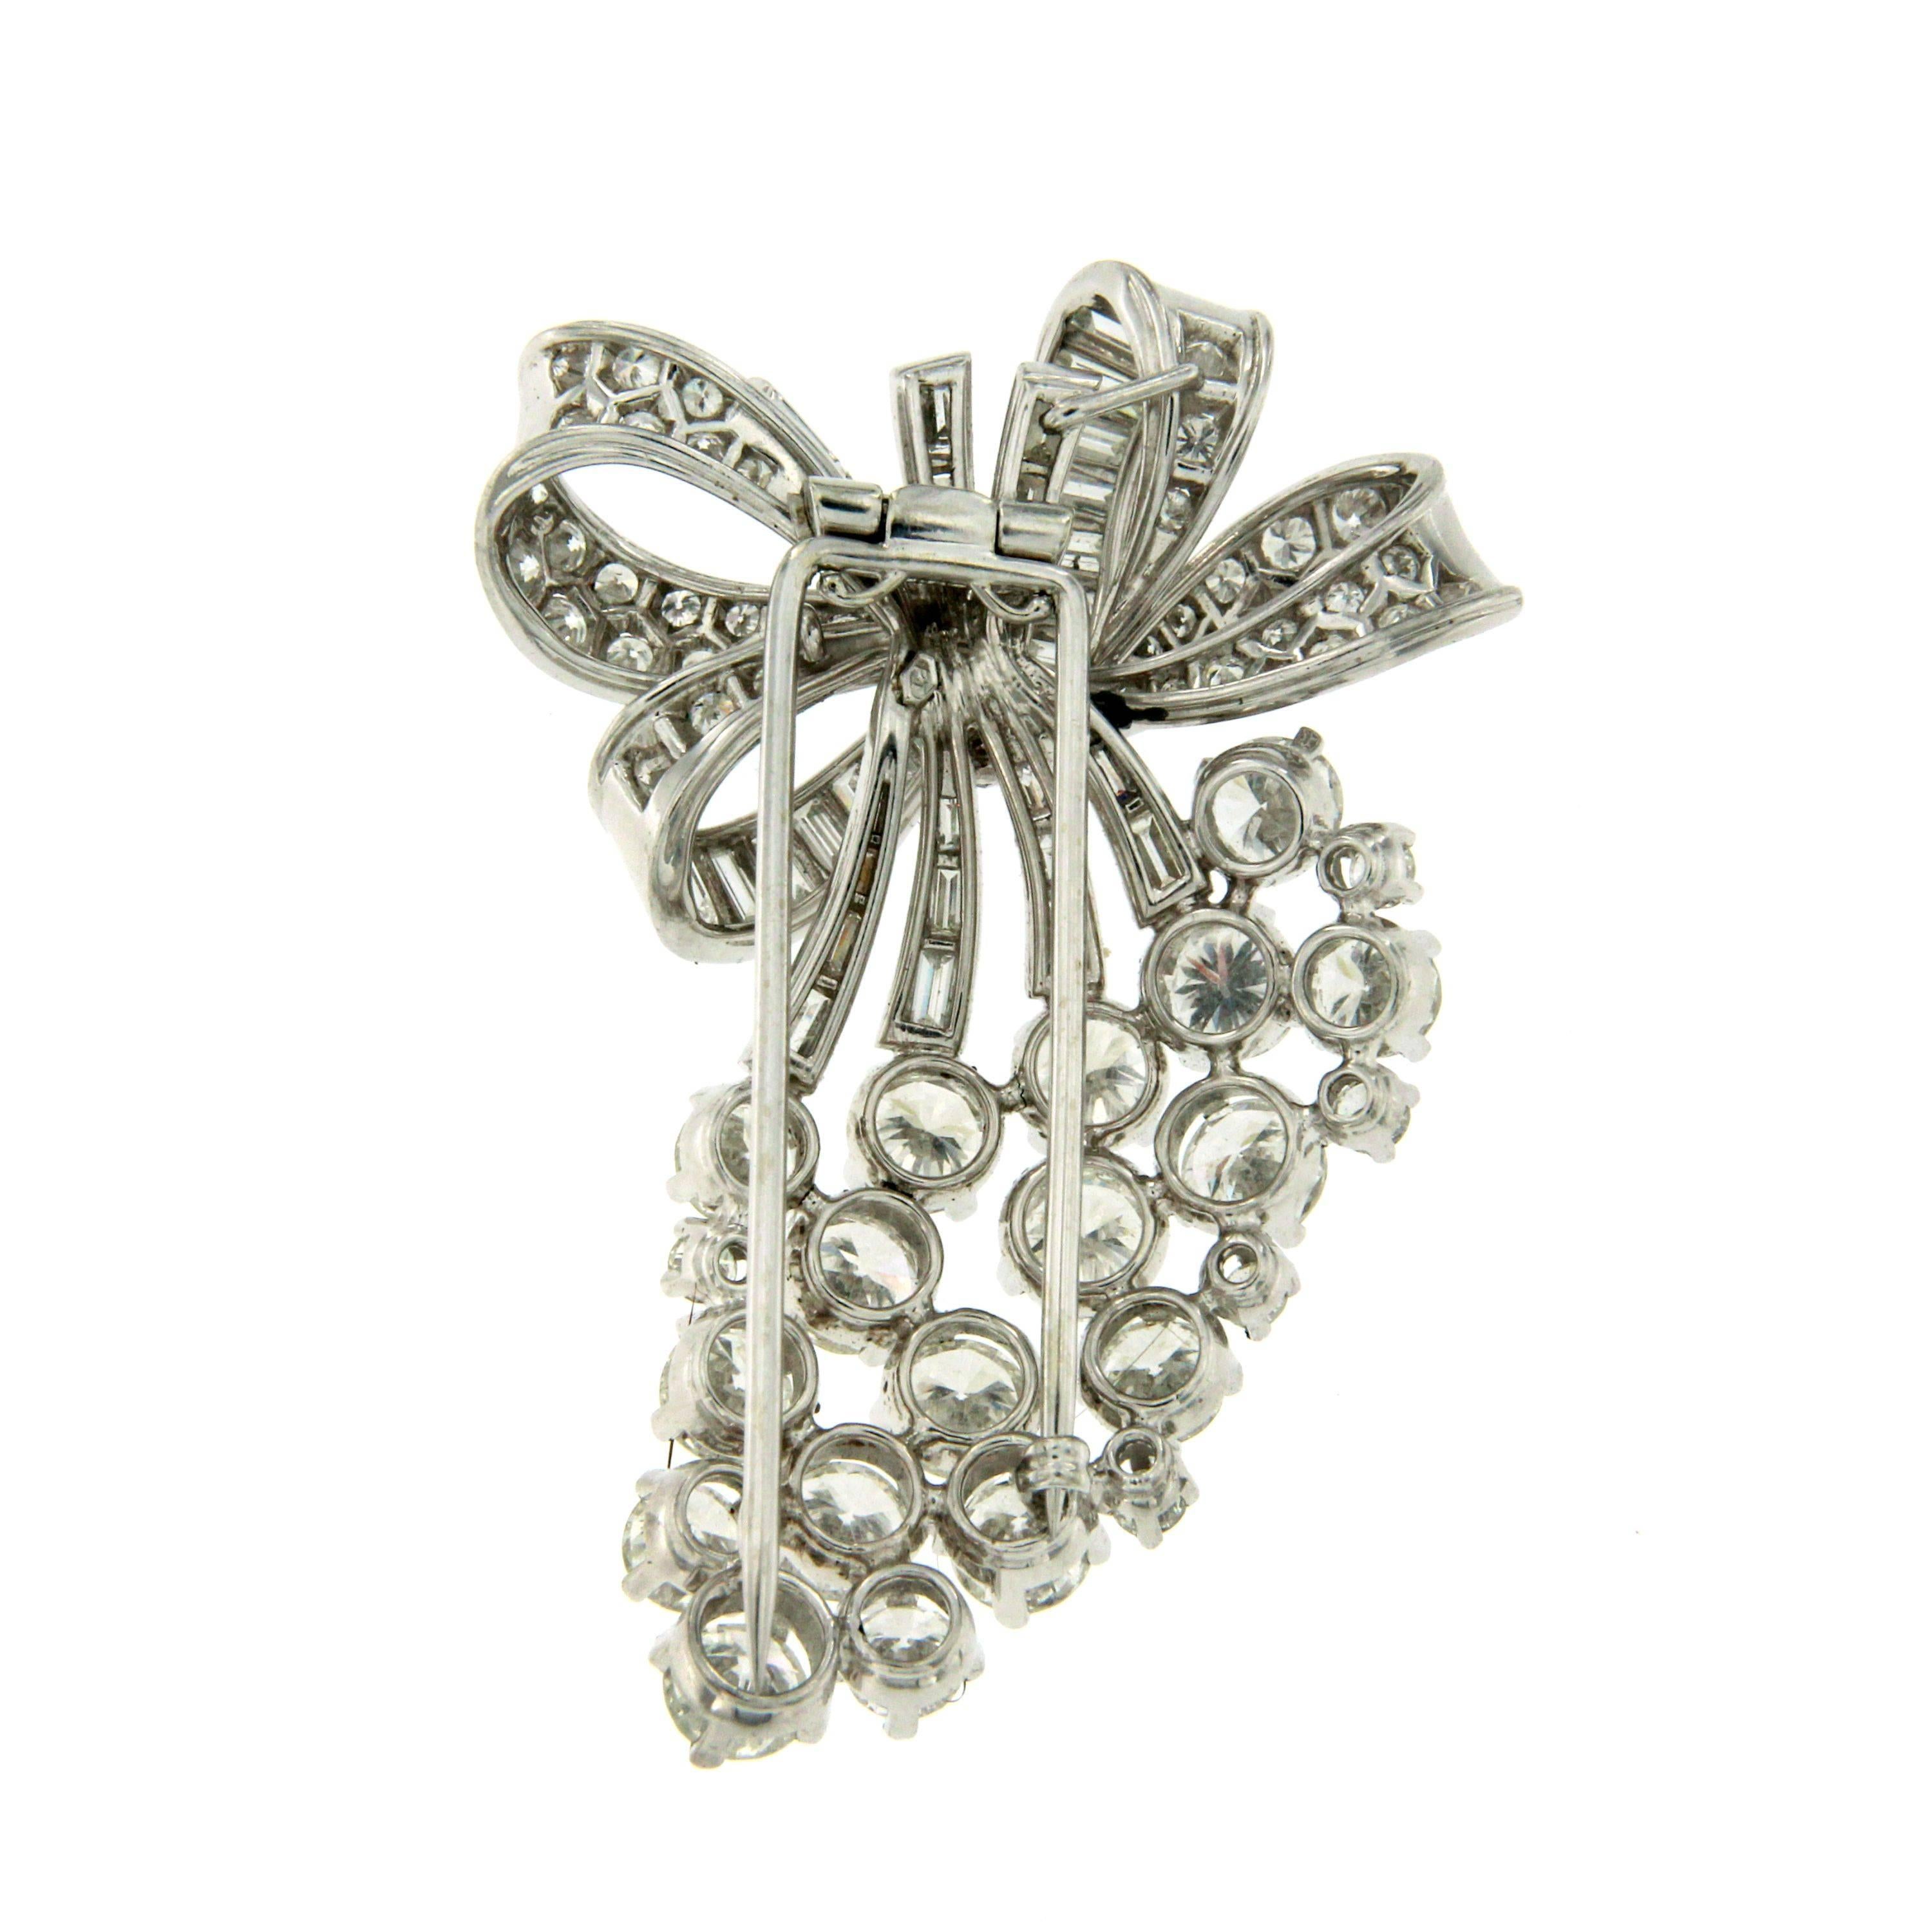 A fabulous Art Deco brooch set with approx. 11.5 total ct of round/baguette cut diamonds.
Handmade Platinum mounting;  This piece is designed and crafted entirely by hand in the traditional way, using age old techniques and processes. Signed Maison